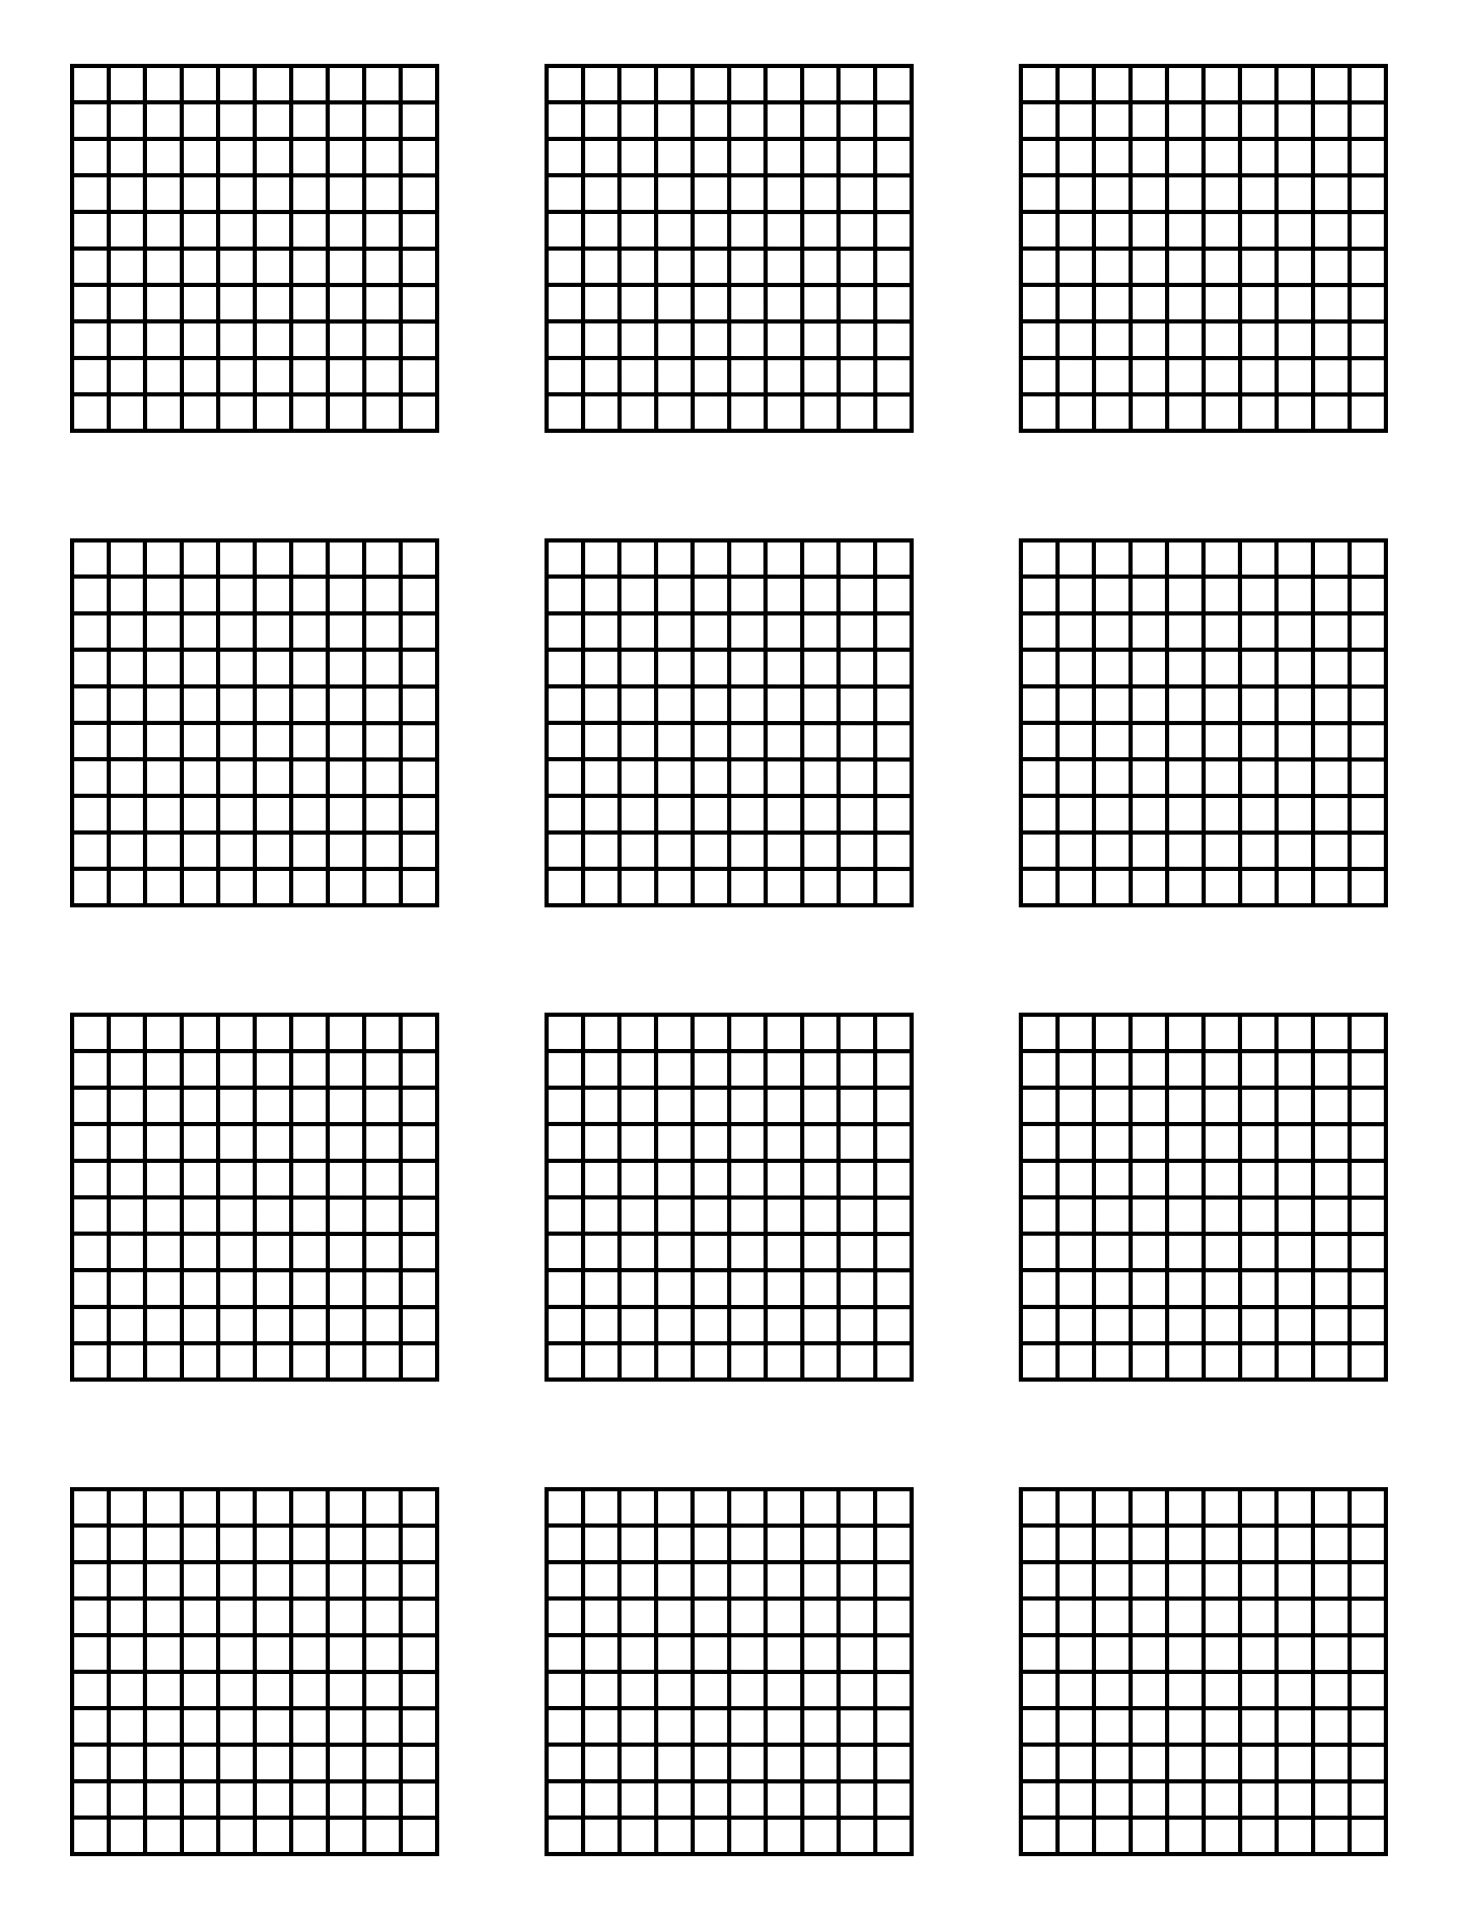 10 Best 10 By 10 Grids Printable